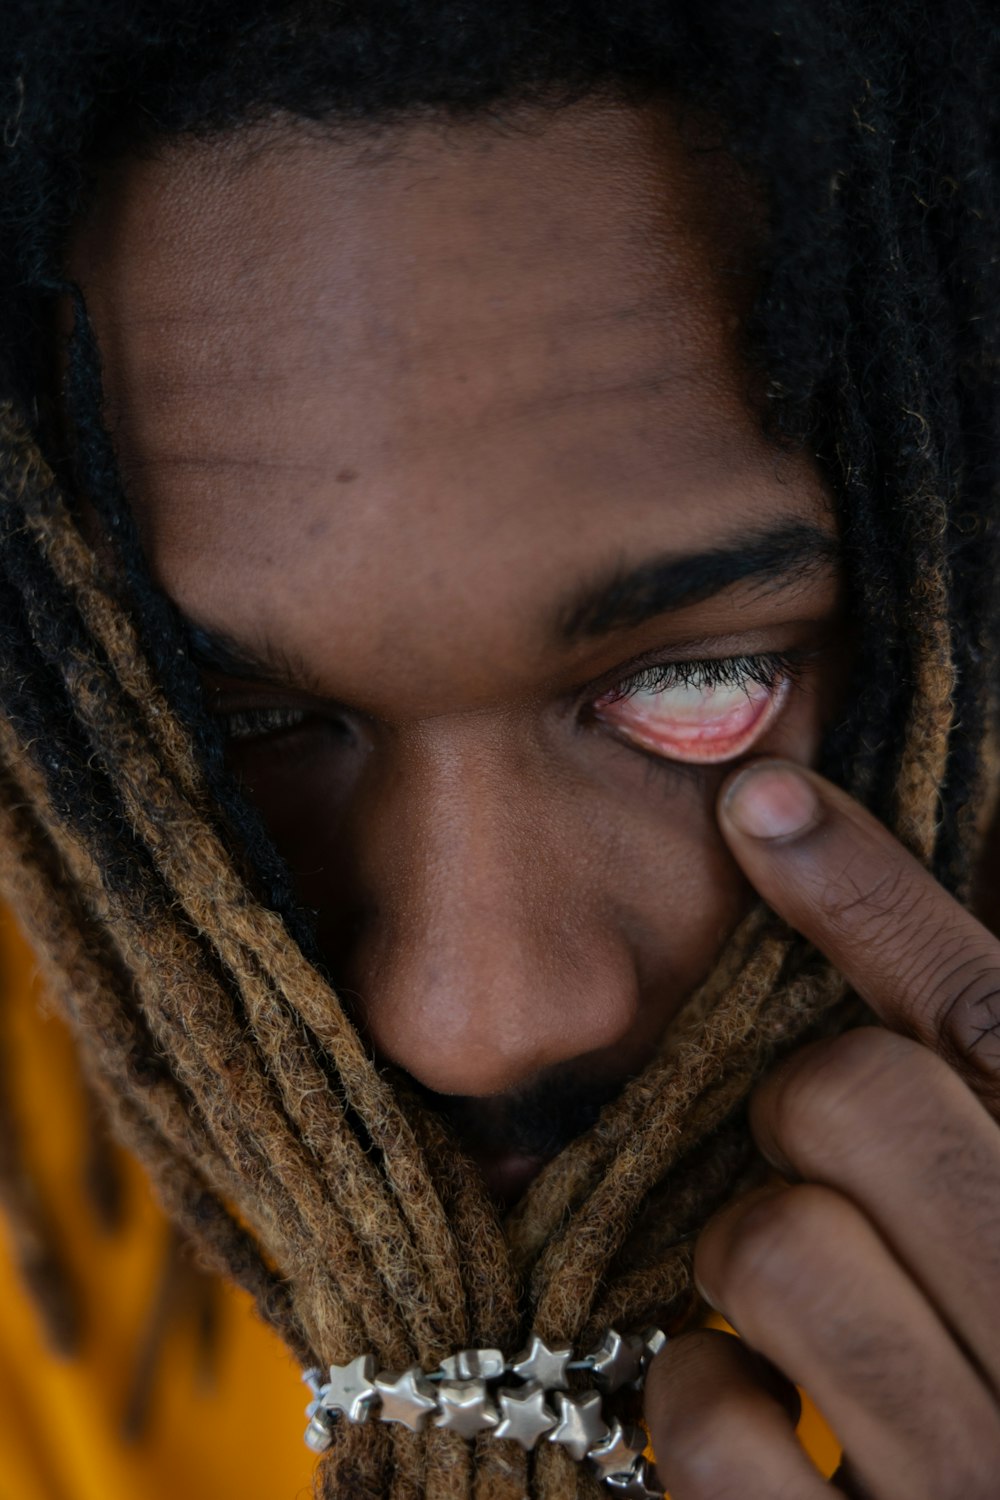 a close up of a person with dreadlocks